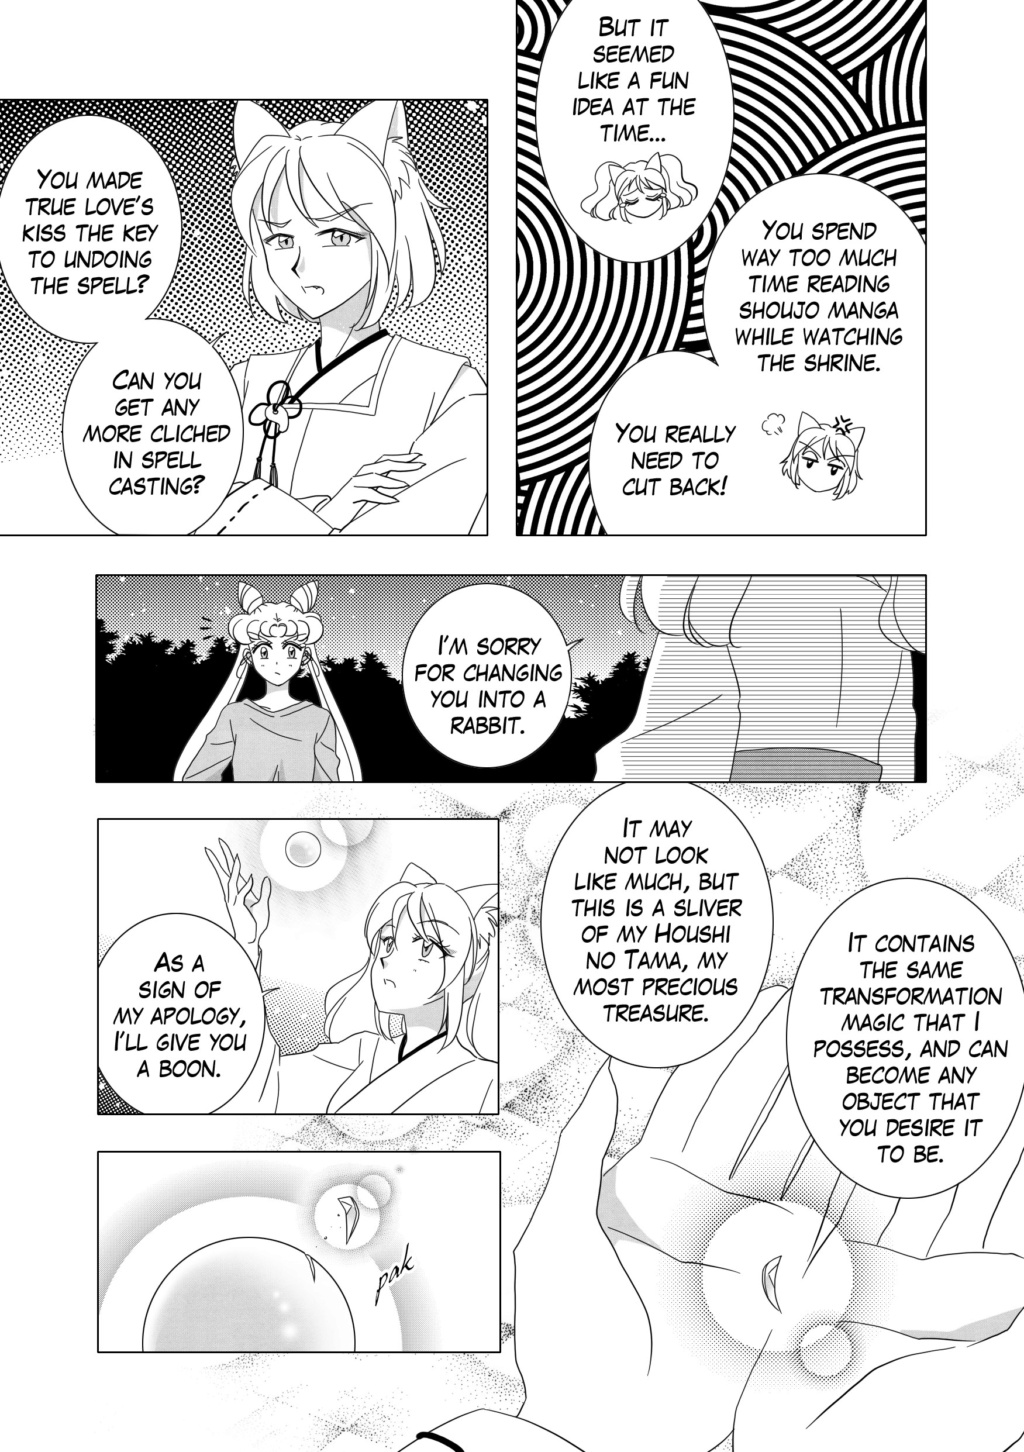 [F] My 30th century Chibi-Usa x Helios doujinshi project: UPDATED 11-25-18 - Page 19 Sbs_pg47